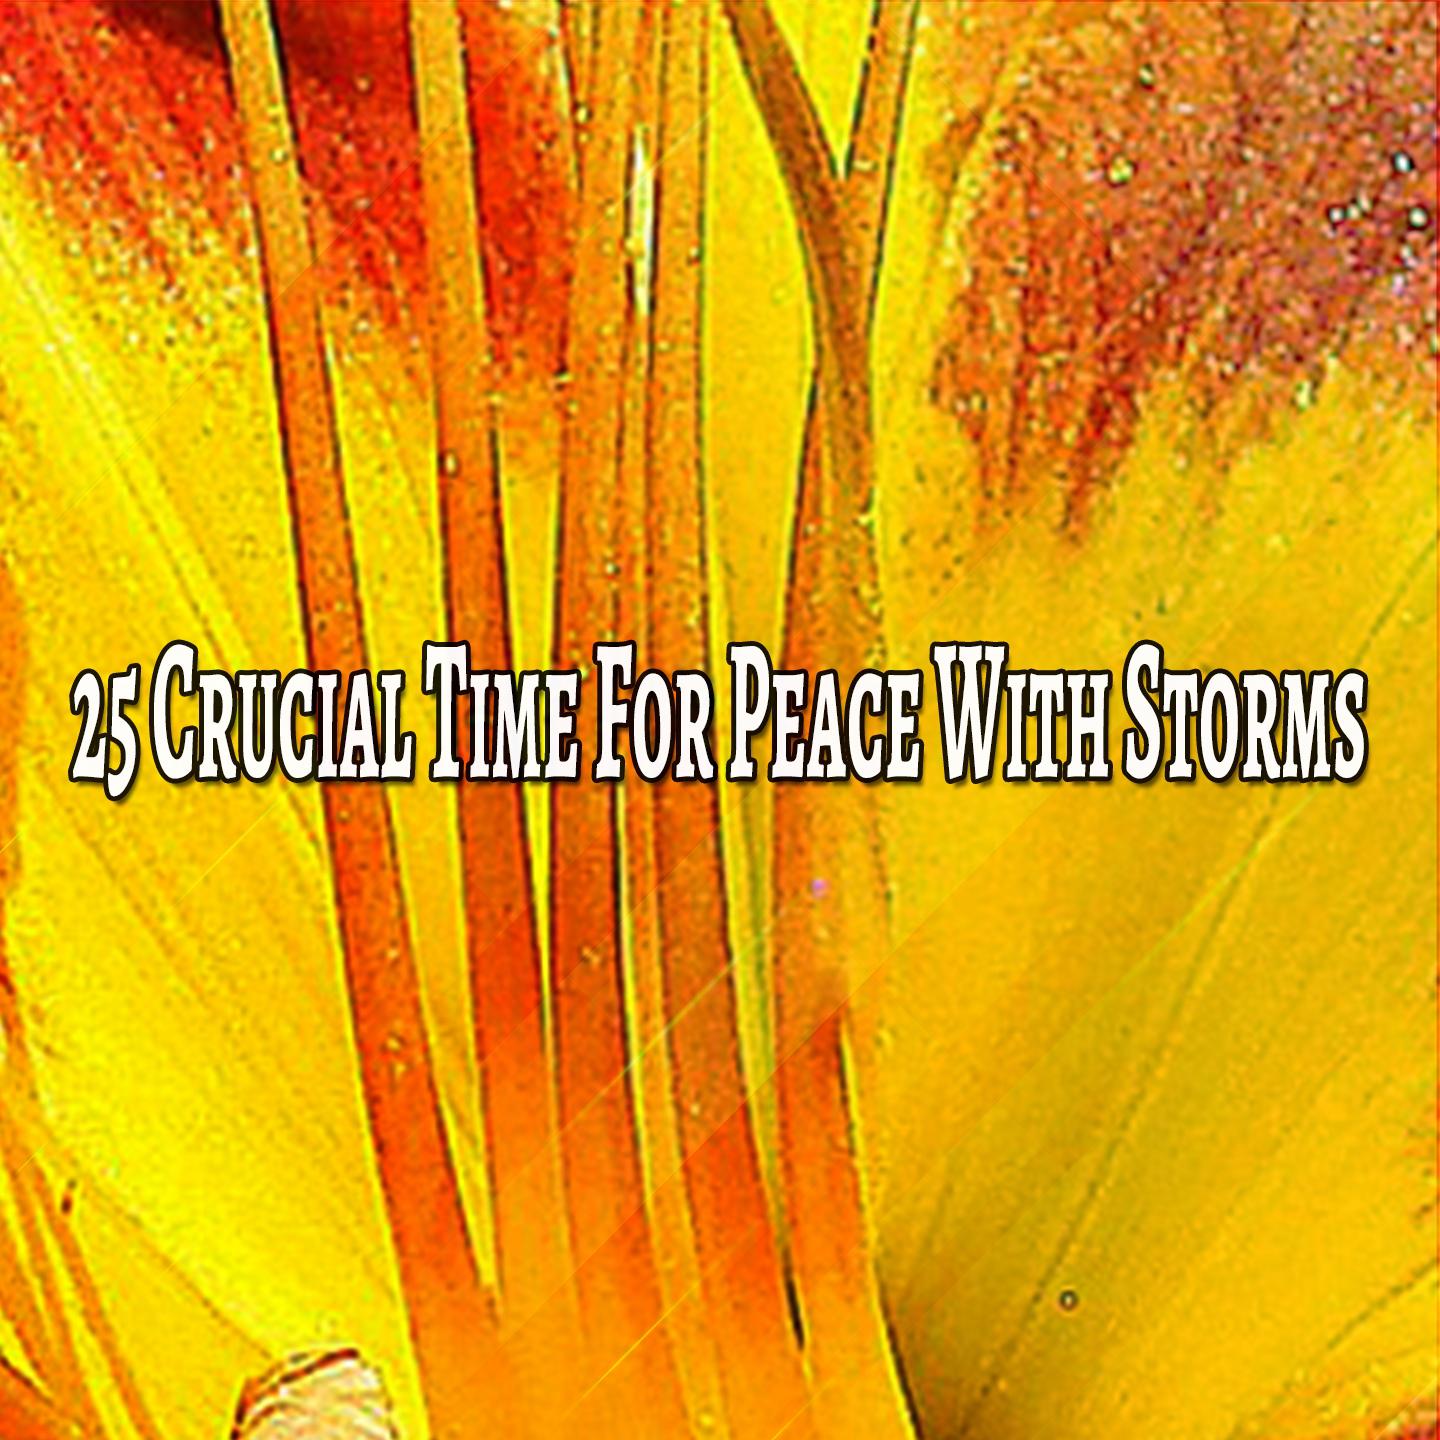 25 Crucial Time For Peace With Storms